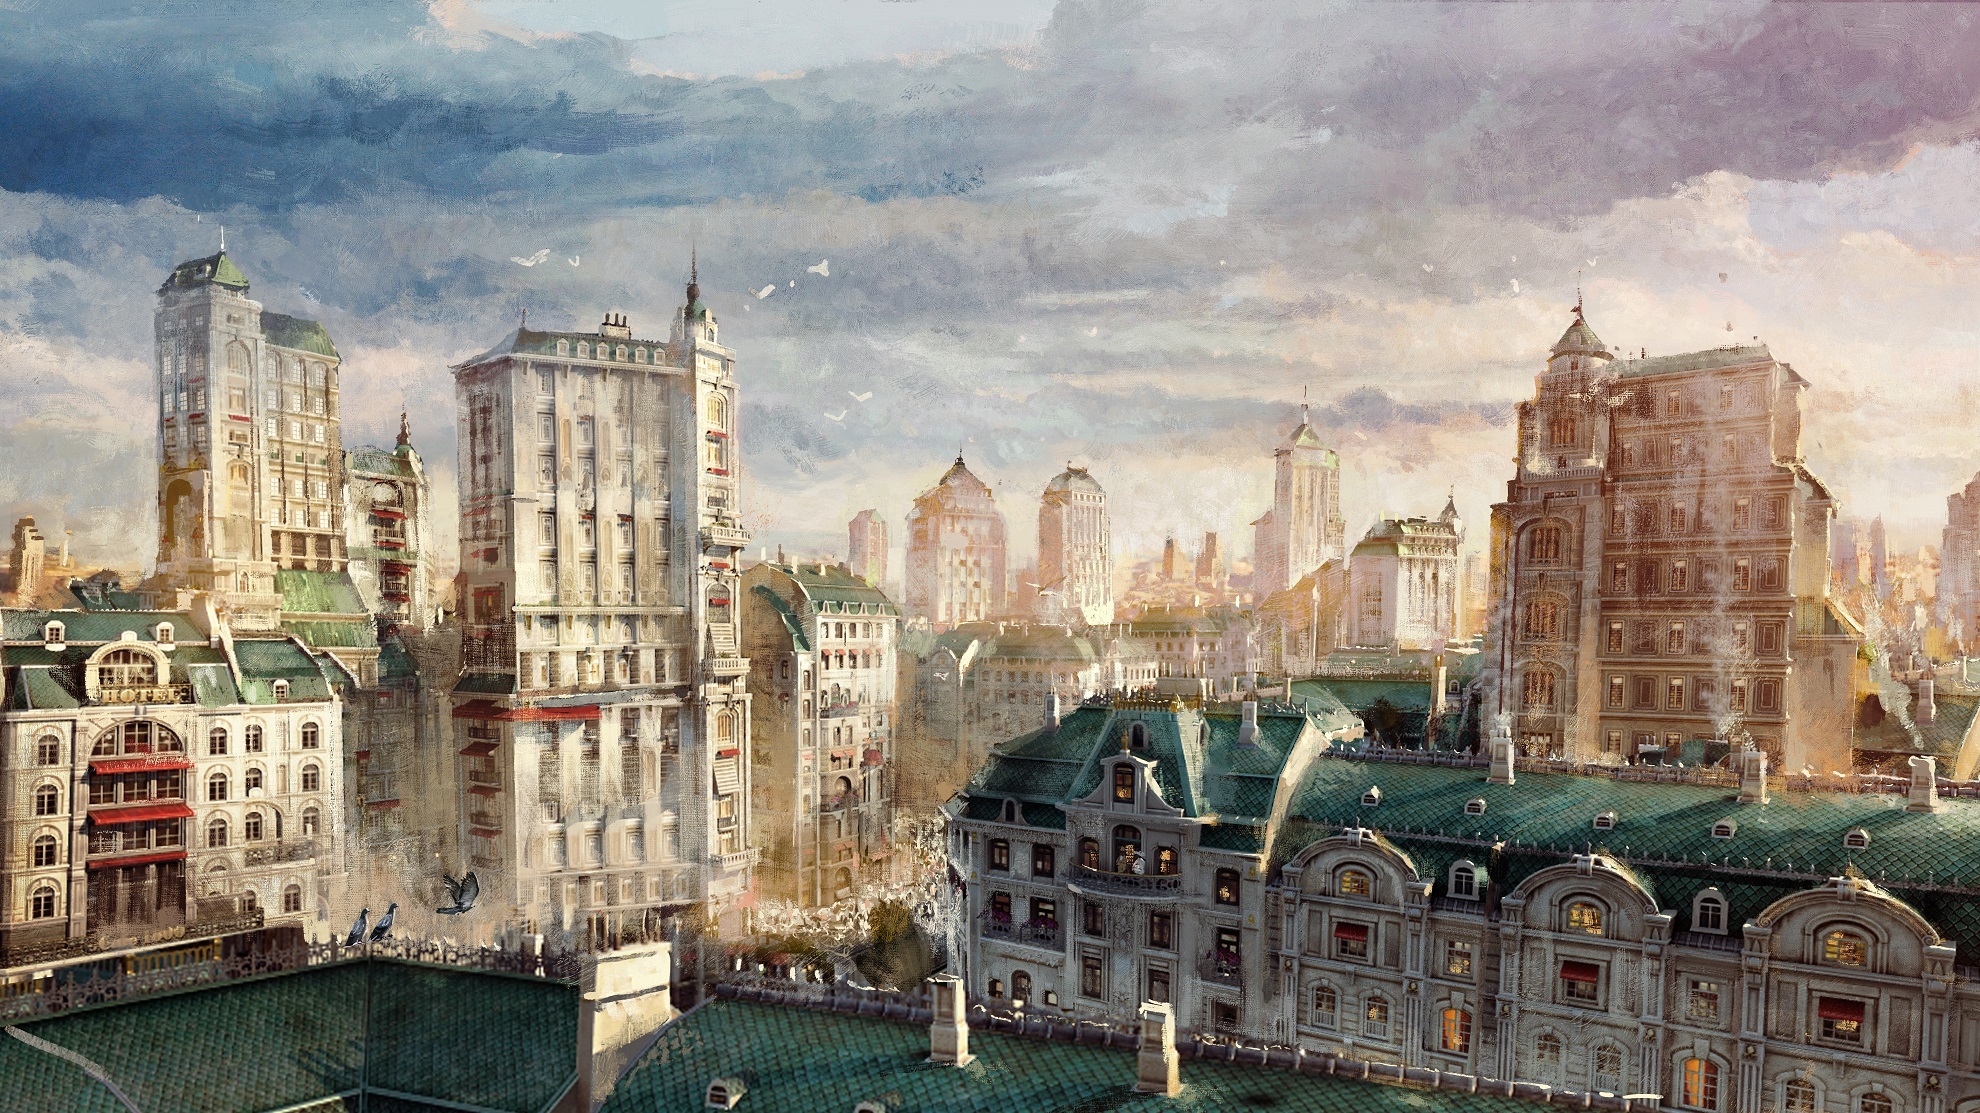 Anno 1800 will have a version for consoles at the end of the month